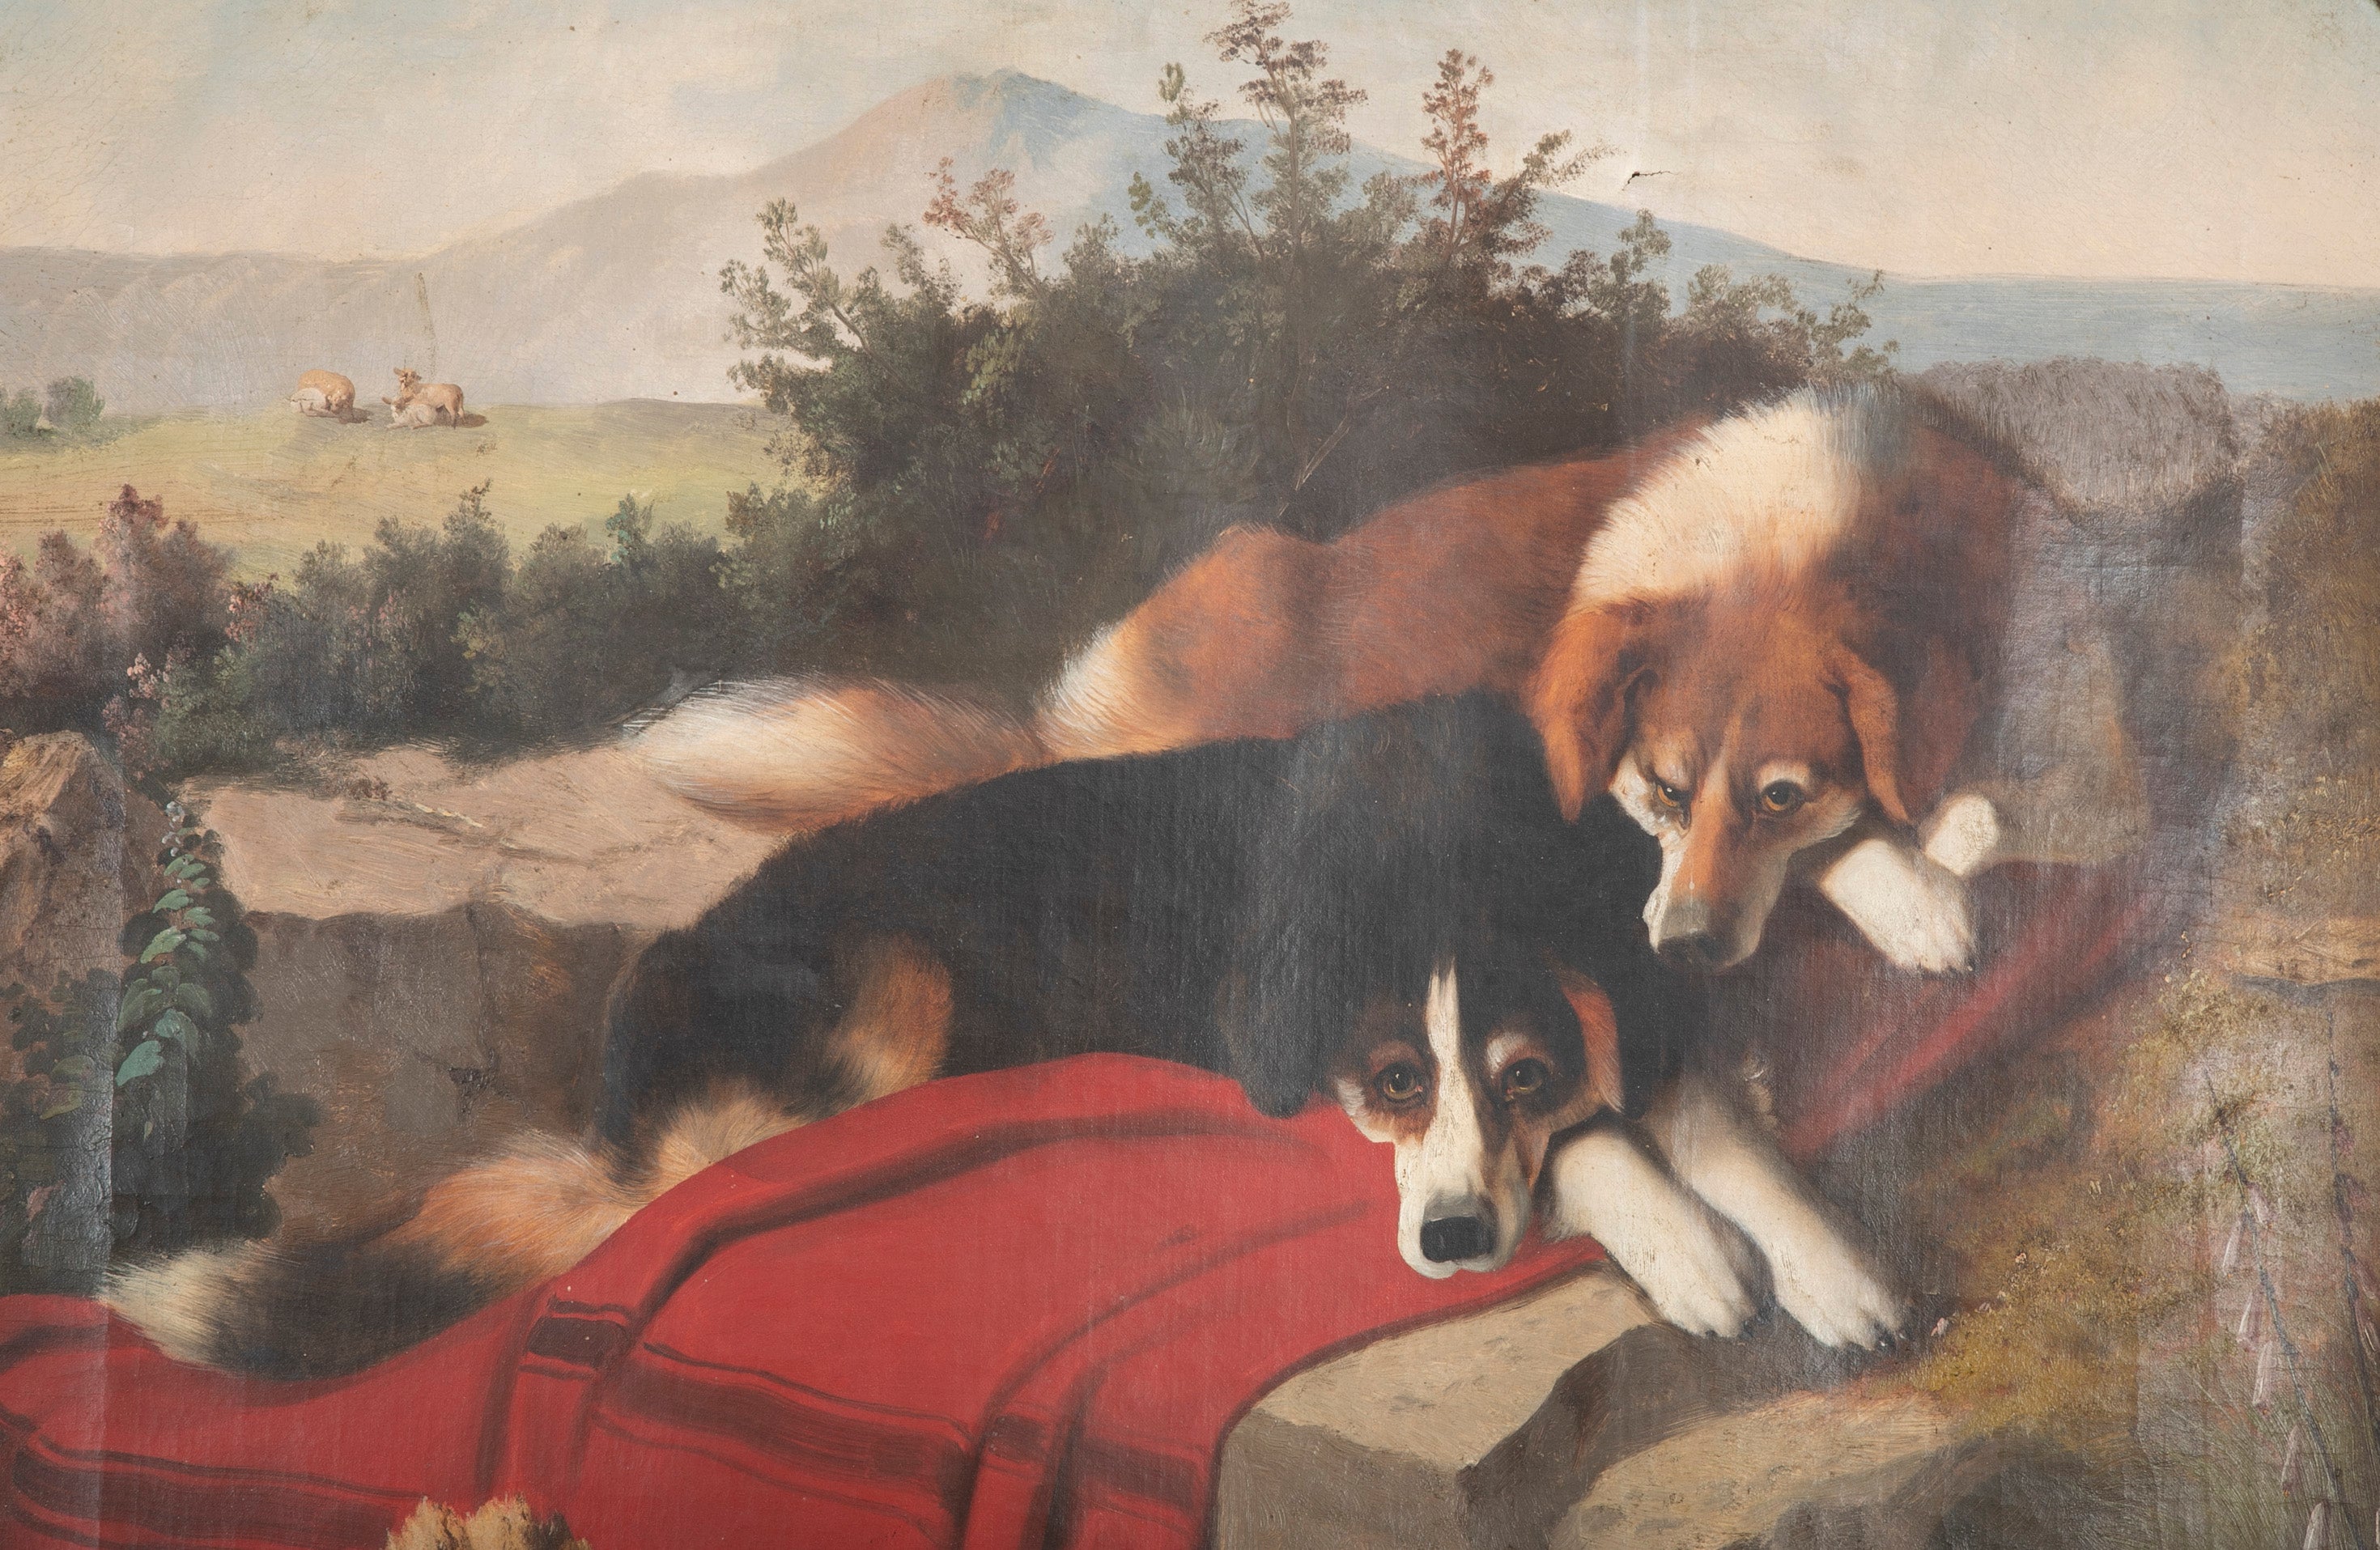 19th Century Scottish Oil on Canvas of Two Herding Dogs Keeping Watch